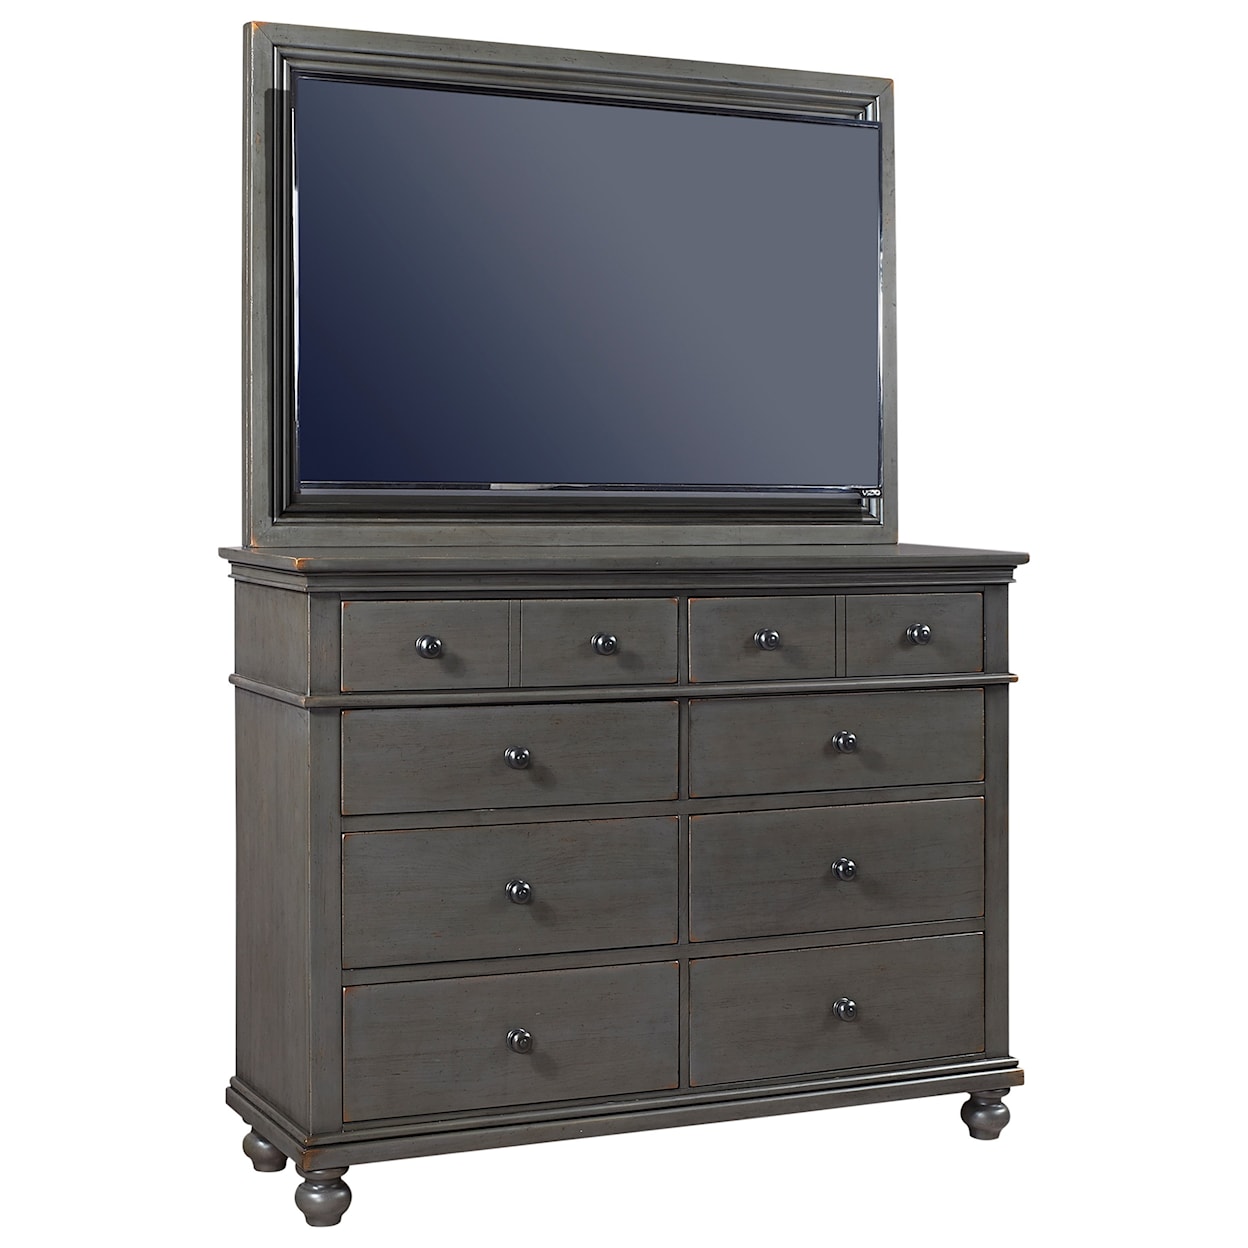 Aspenhome Oxford Media Chest with TV Mount